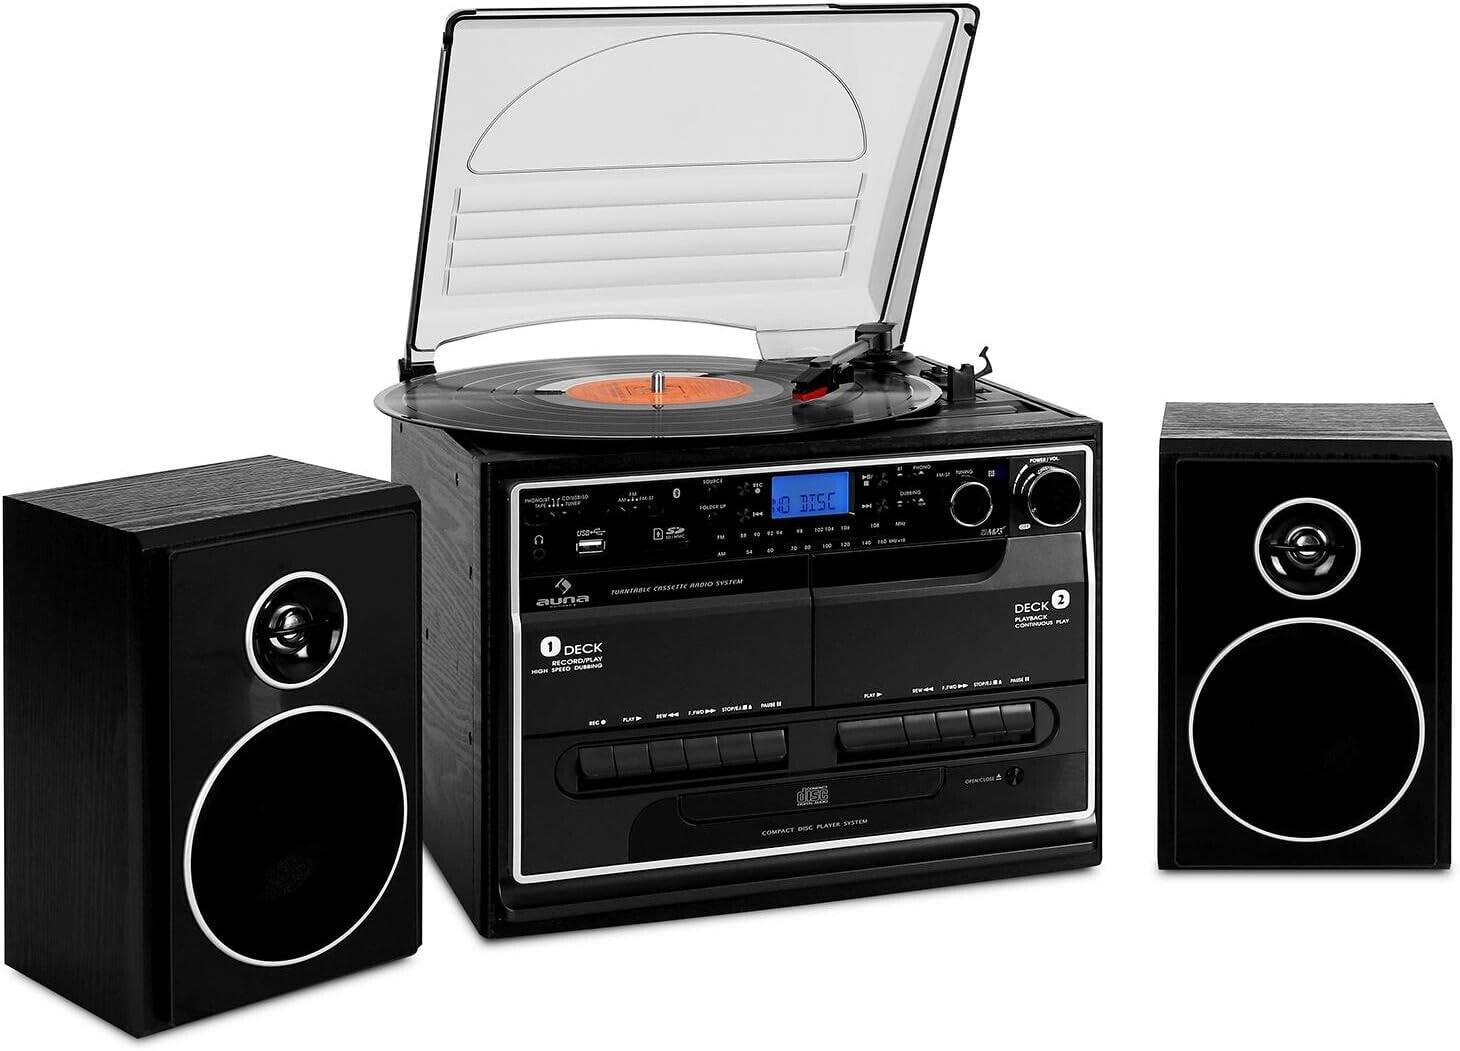 Auna Record Player for Records, Turntable with Speaker, USB & CD Player, Record Player with Bluetooth, Audio Record Player, Modern Vinyl Player, Turntable with FM Radio